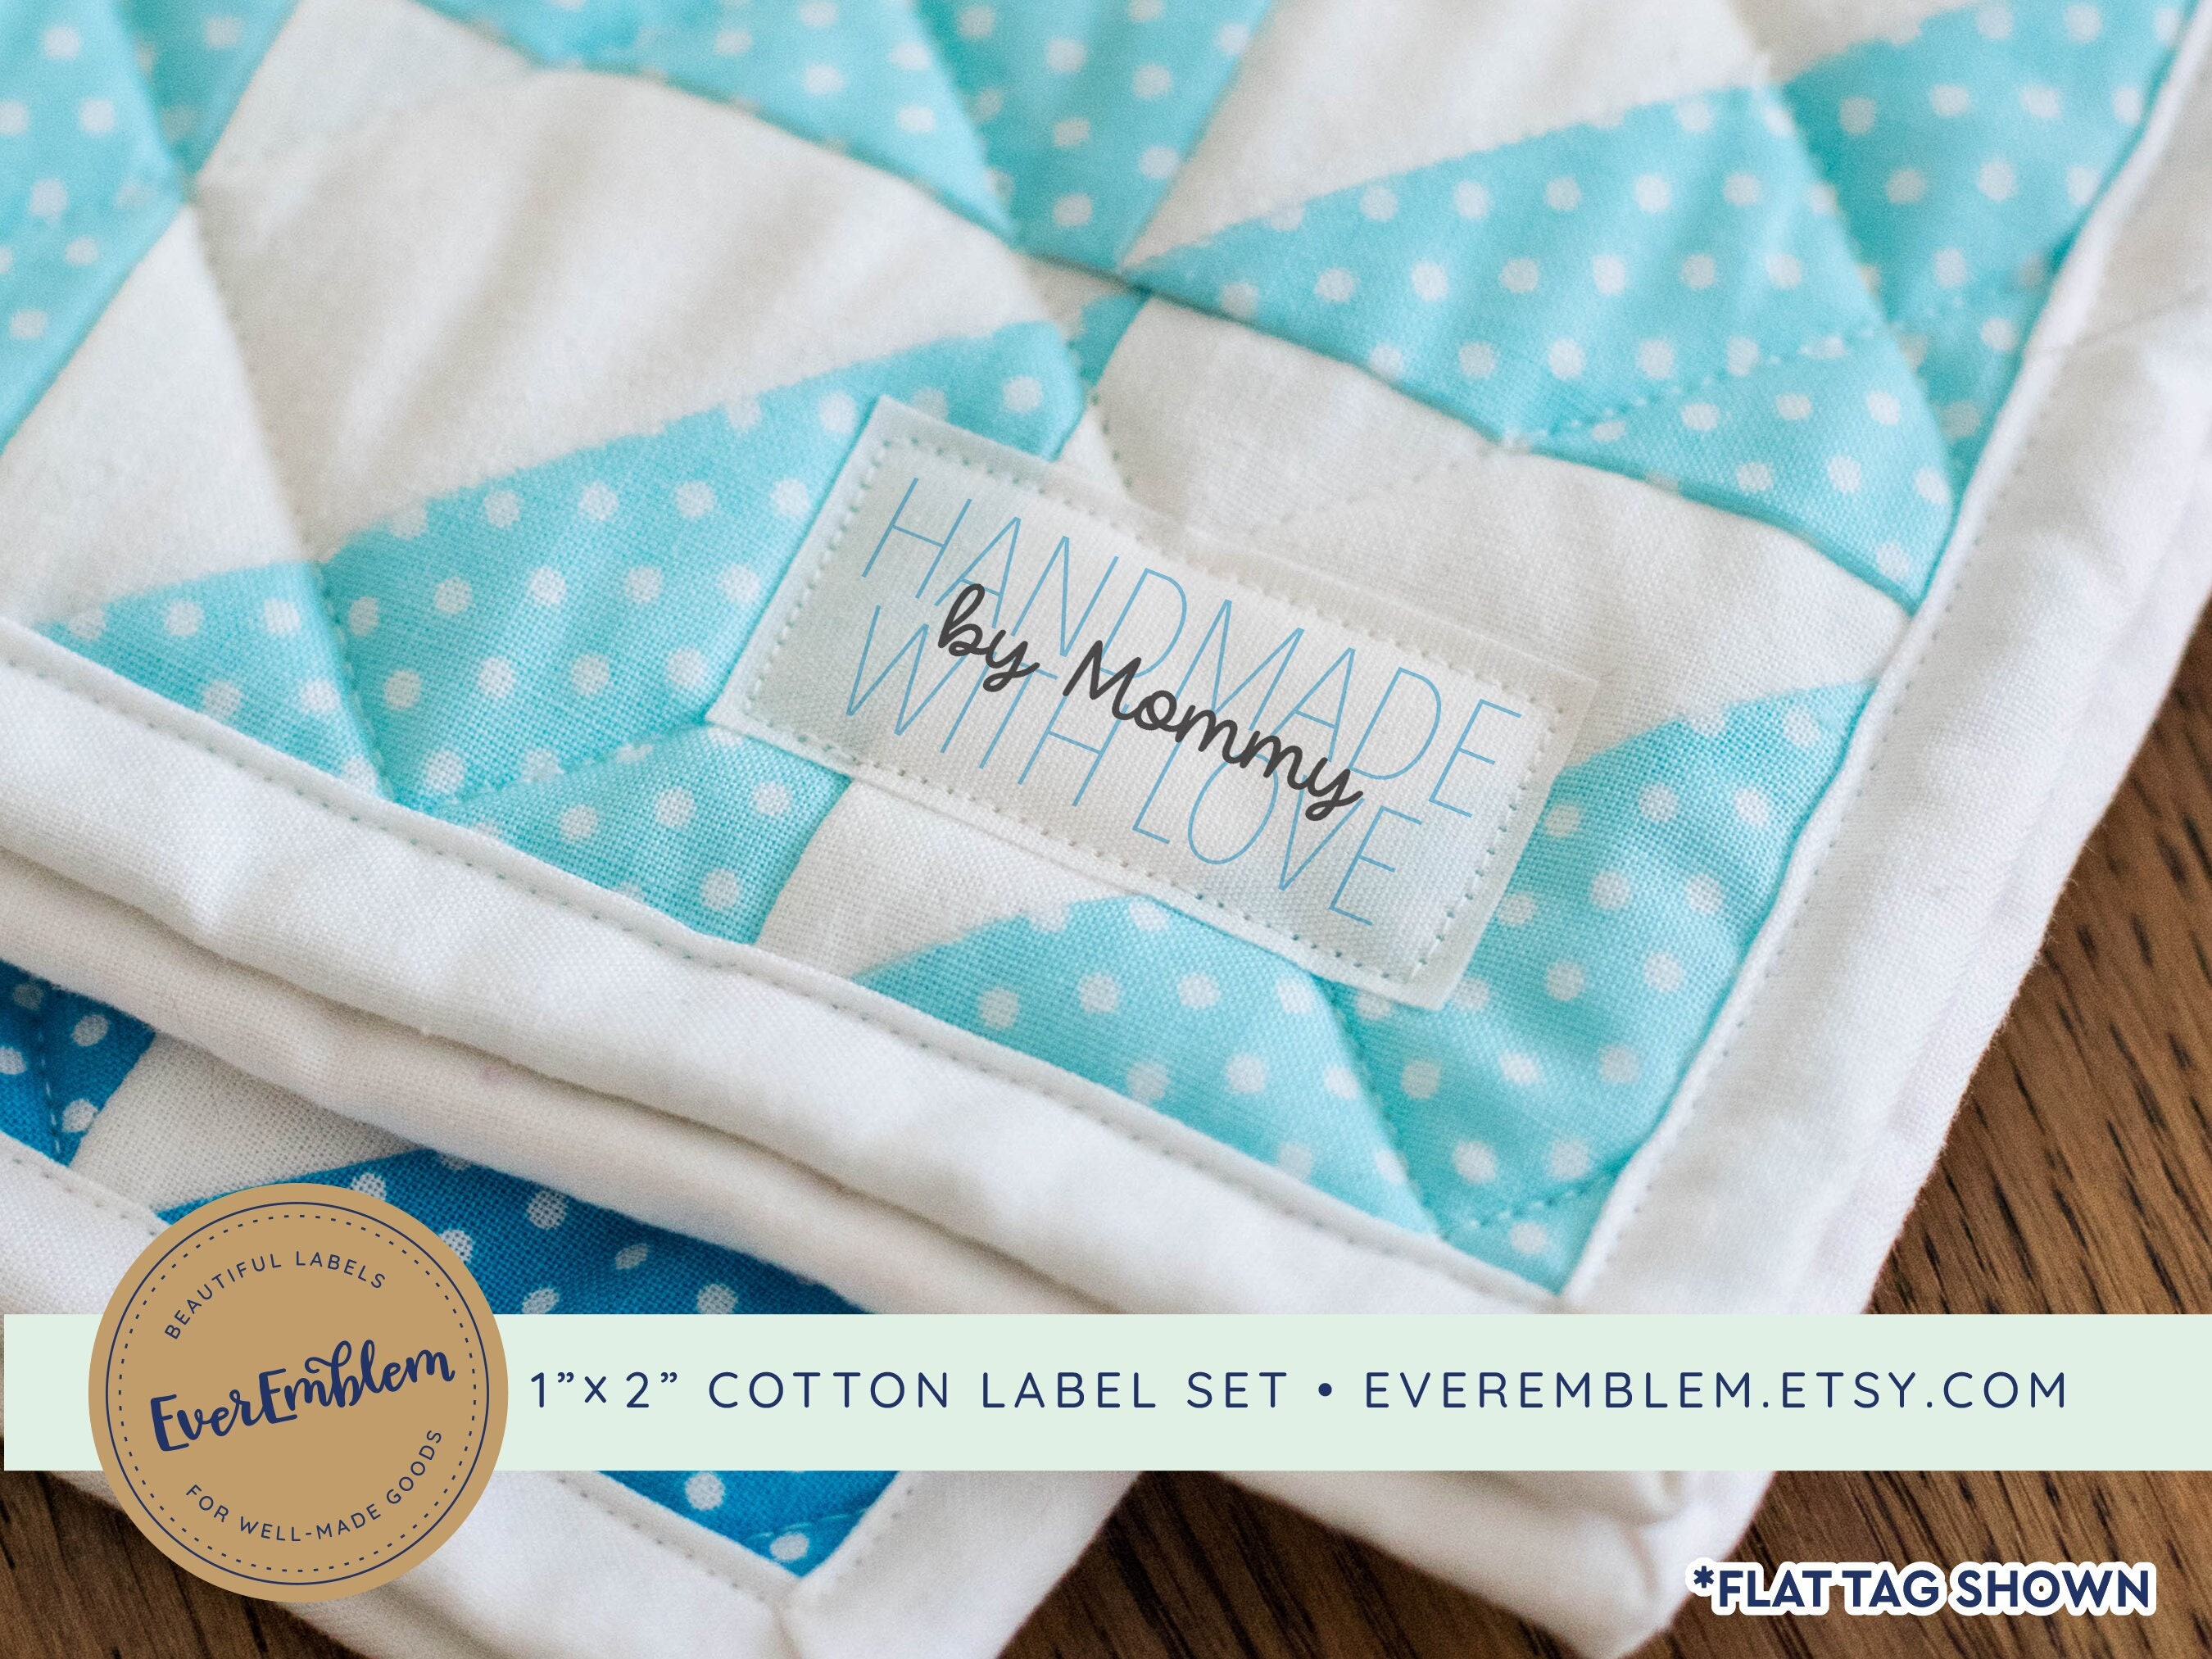 Personalized Sewing Labels, Lavender Watercolor Design With Custom Text  organic Cotton, for Handmade Items 